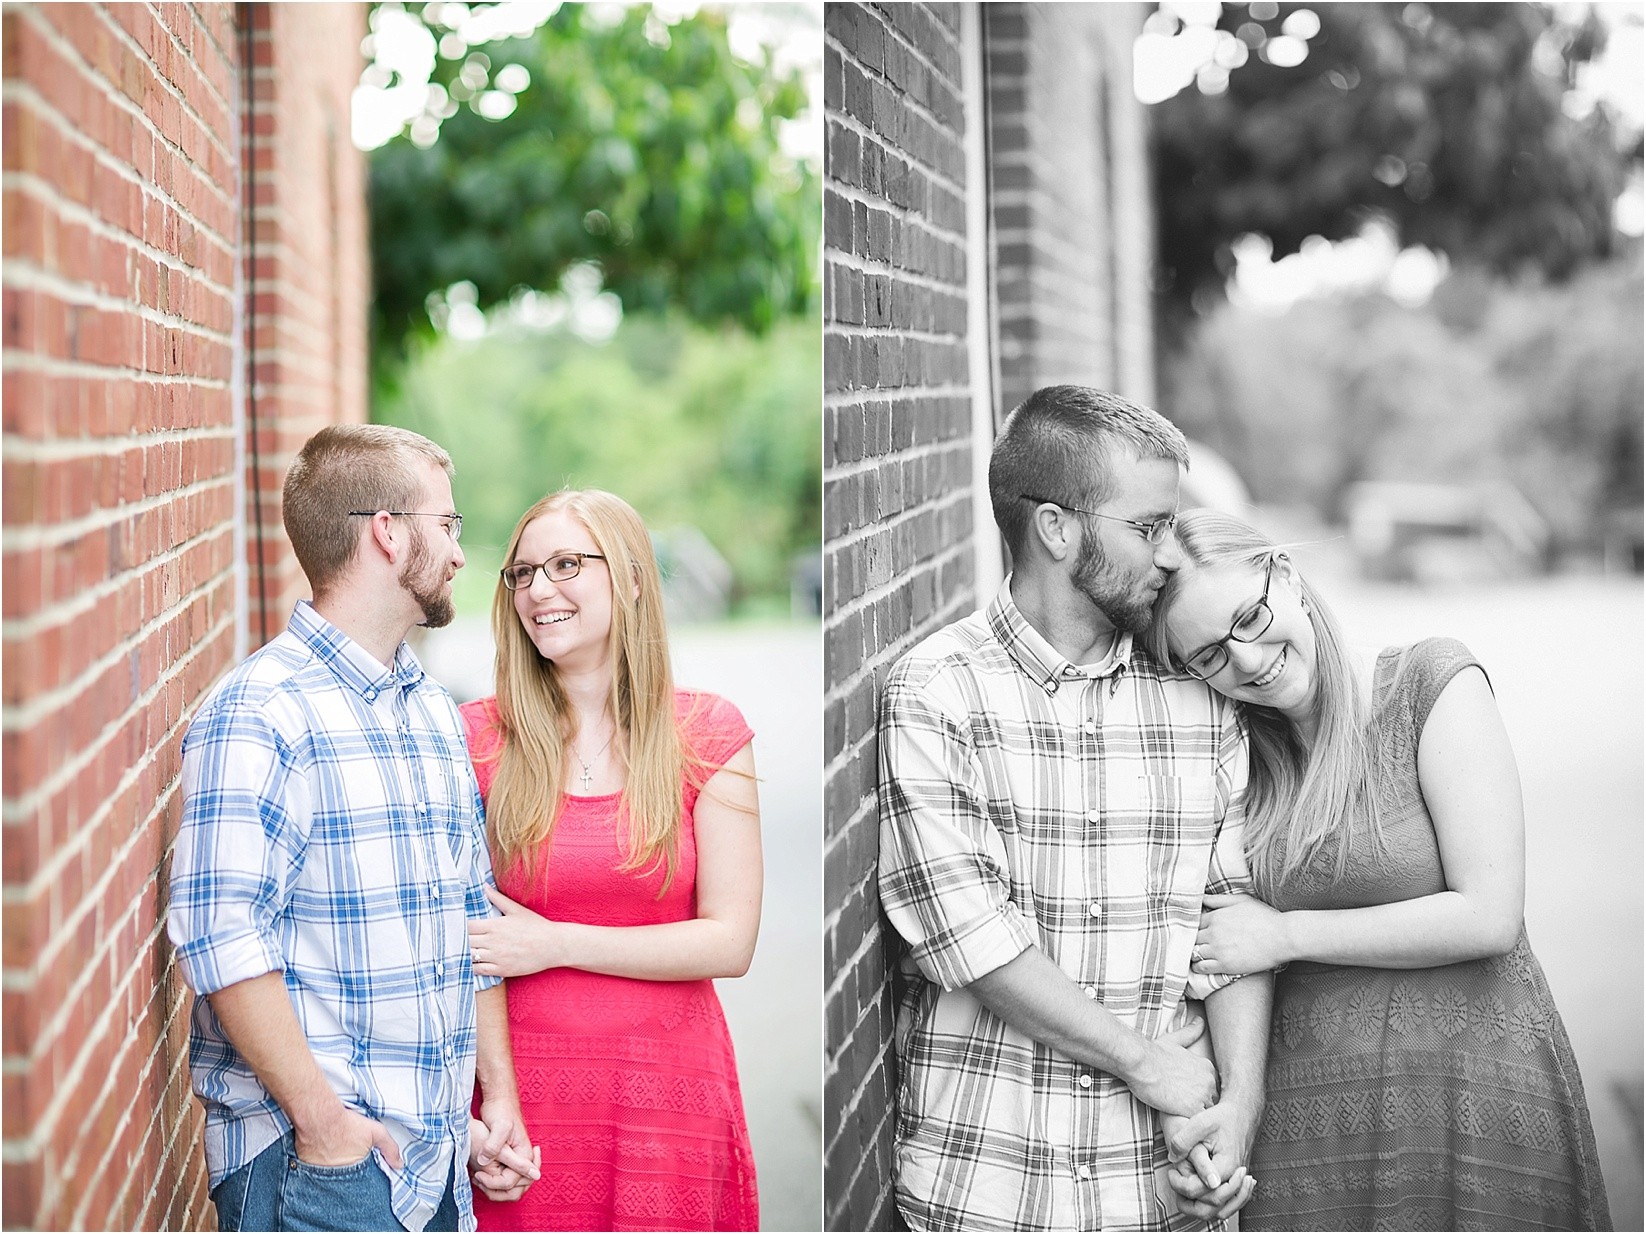 leaning on his shoulder during Andria & Matts Mount Pleasant engagement session in downtown mount pleasant nc